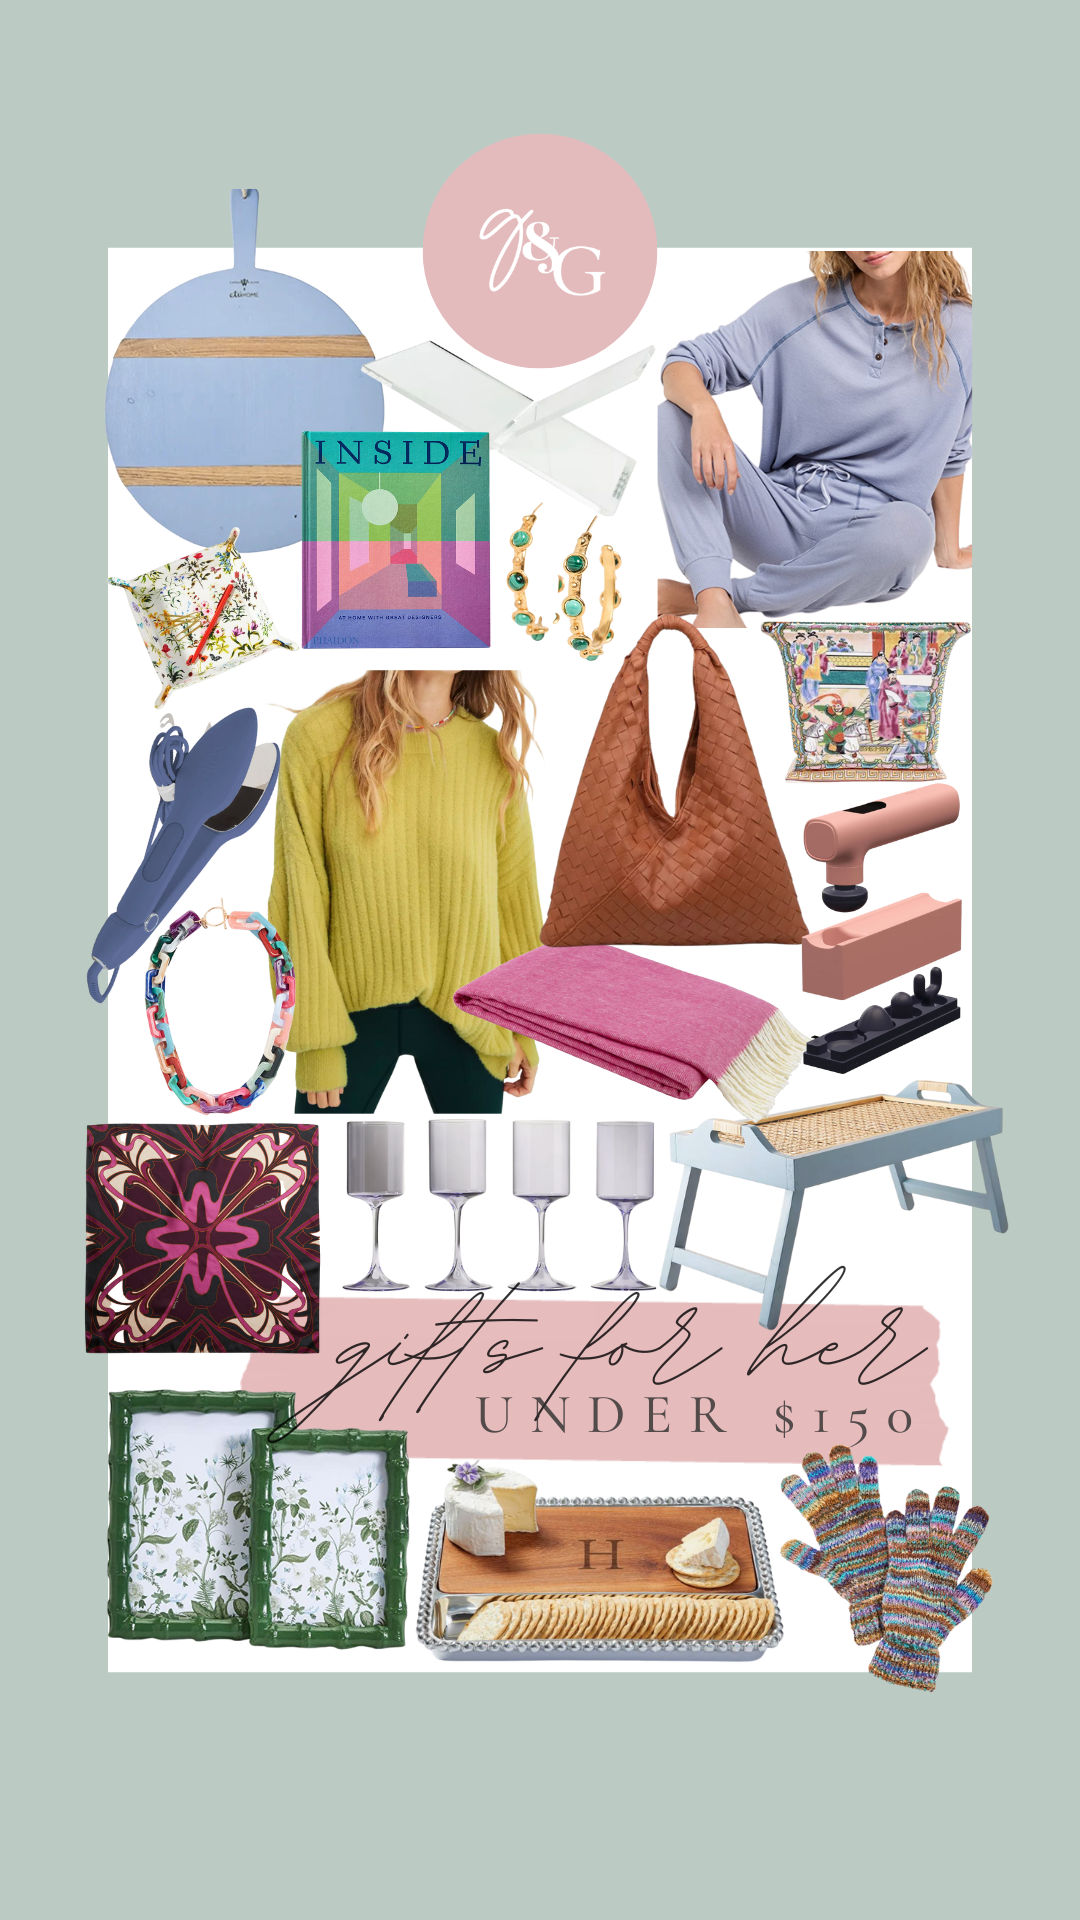 Gift Guide 15 Gifts for Her Under $50 - SheShe Show